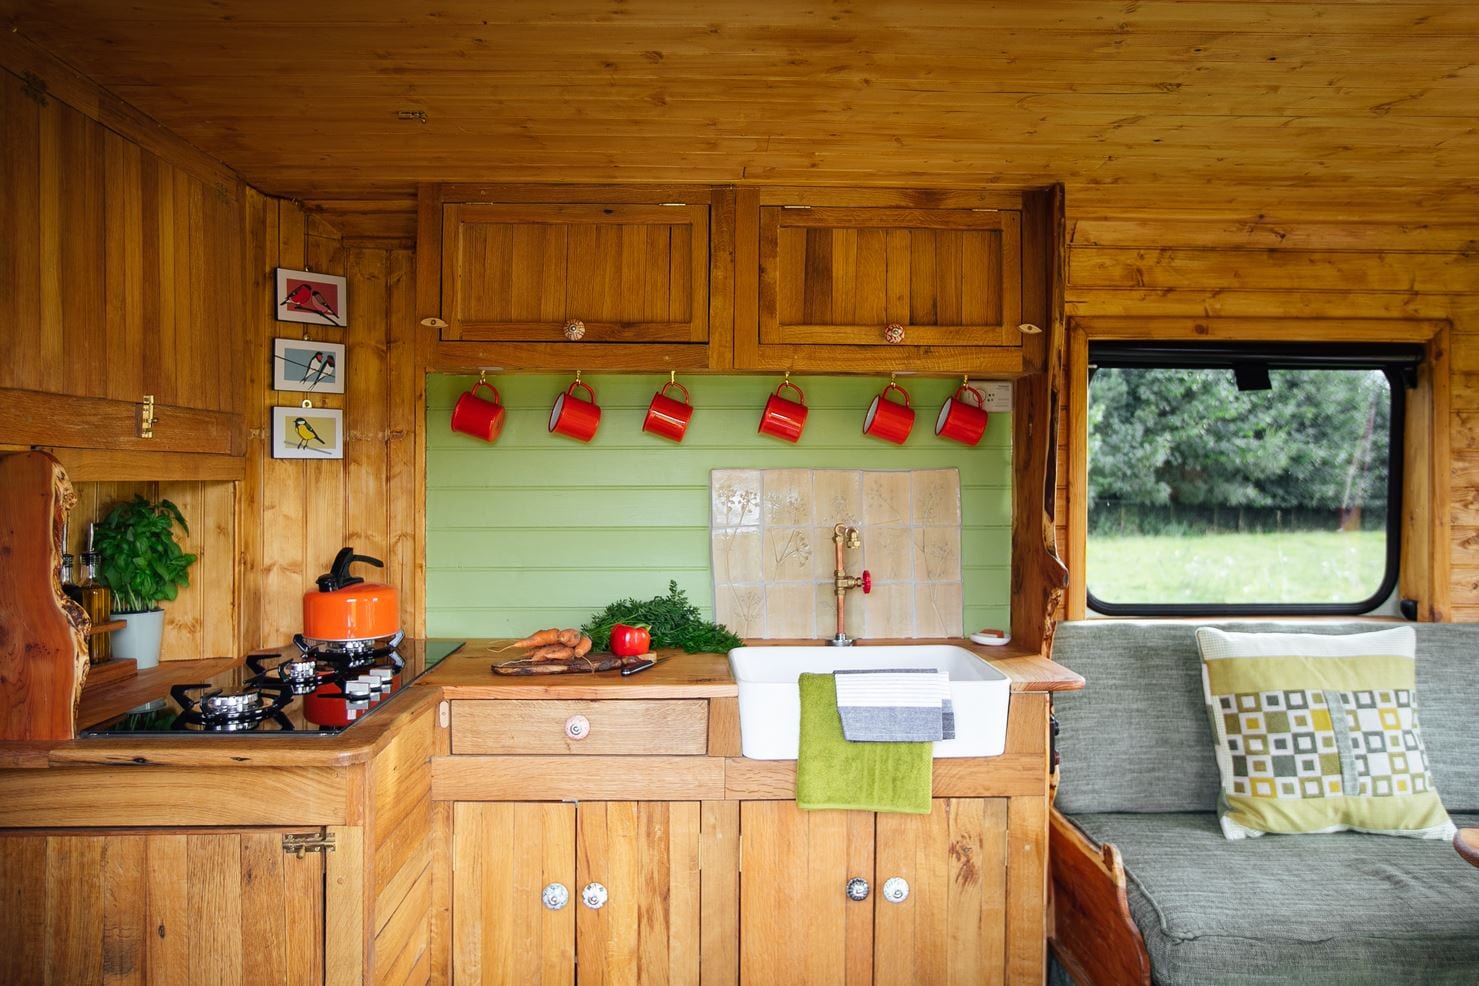 The image shows the interior of a wooden campervan kitchen featuring a countertop with a ceramic sink. Above, there are several red mugs hanging on hooks. To the left, a stove with a pot and several potted plants. To the right, a cushioned seating area with a green throw blanket on it.